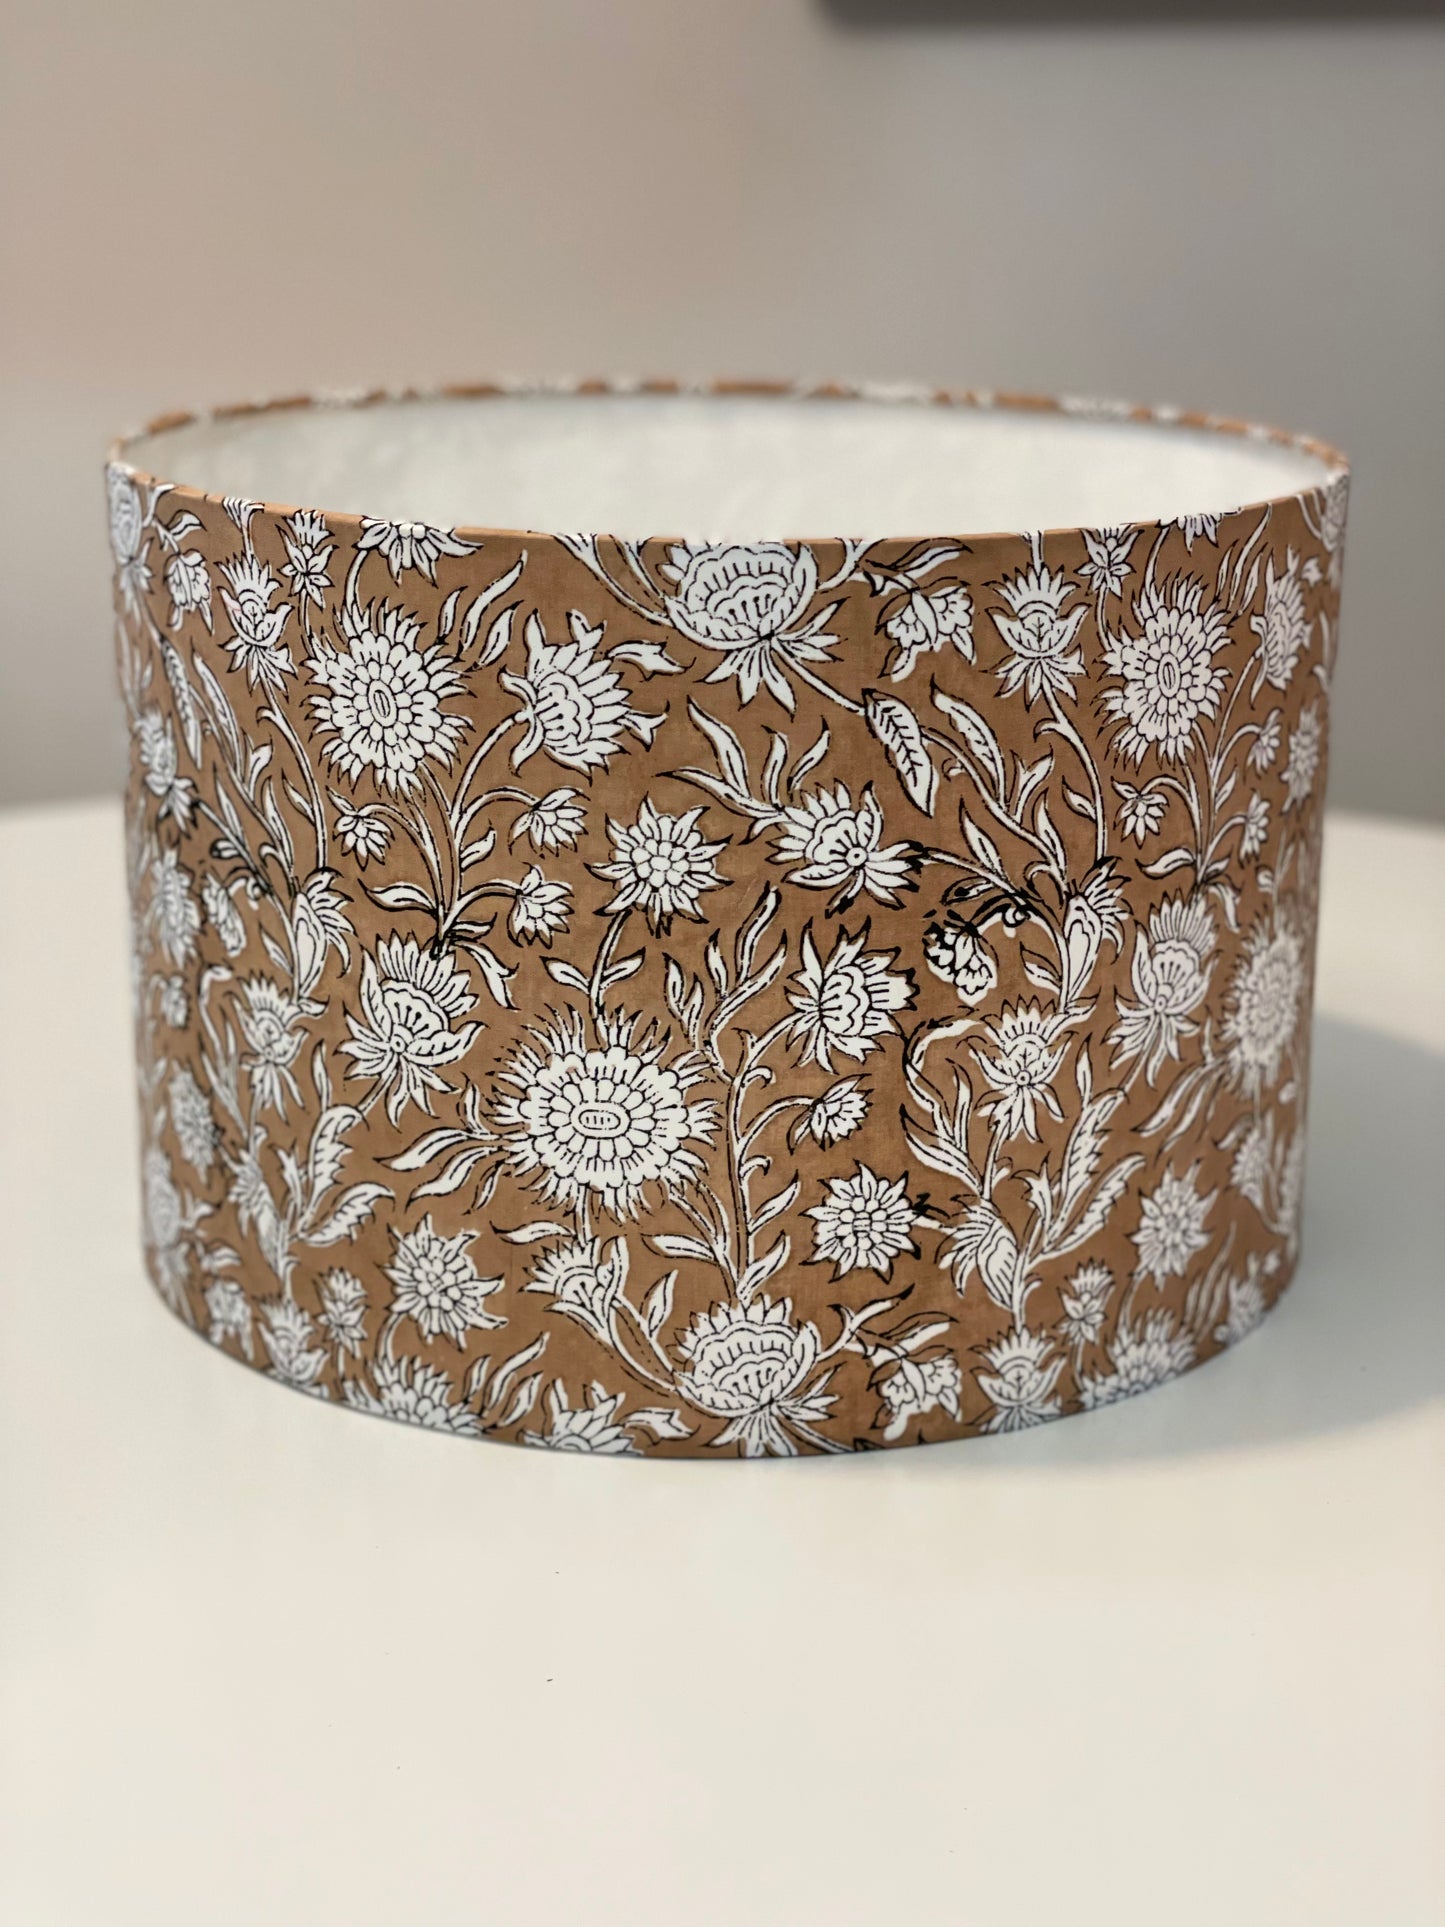 12 Inch Drum Shade. Hand Block Print from Jaipur. Camel and Ivory Floral Motif.